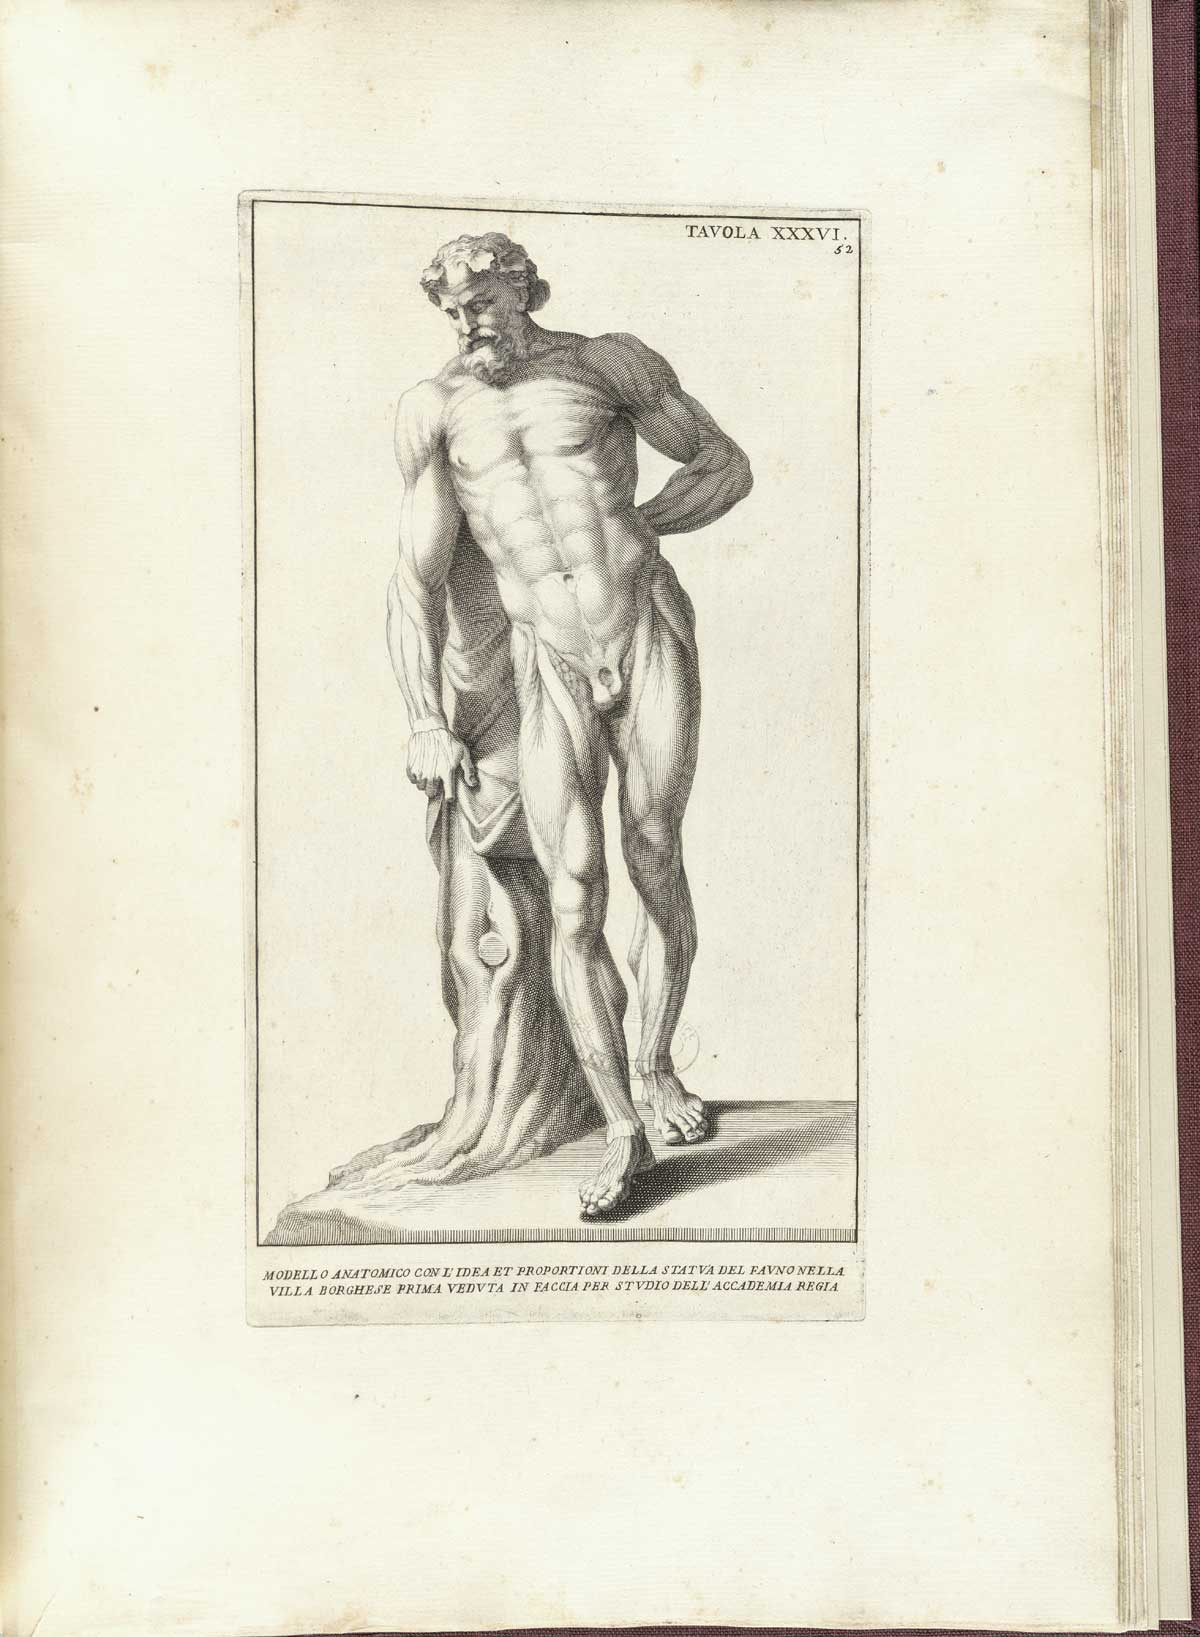 Engraving based on a statue of a faun in the Borghese collection, a standing nude facing male figure with prominent musculature with left had behind his back and leaning with his right arm on a post or tree; from Bernardino Genga’s Anatomia per uso et intelligenza del disegno, NLM Call no.: WZ 250 G329an 1691.